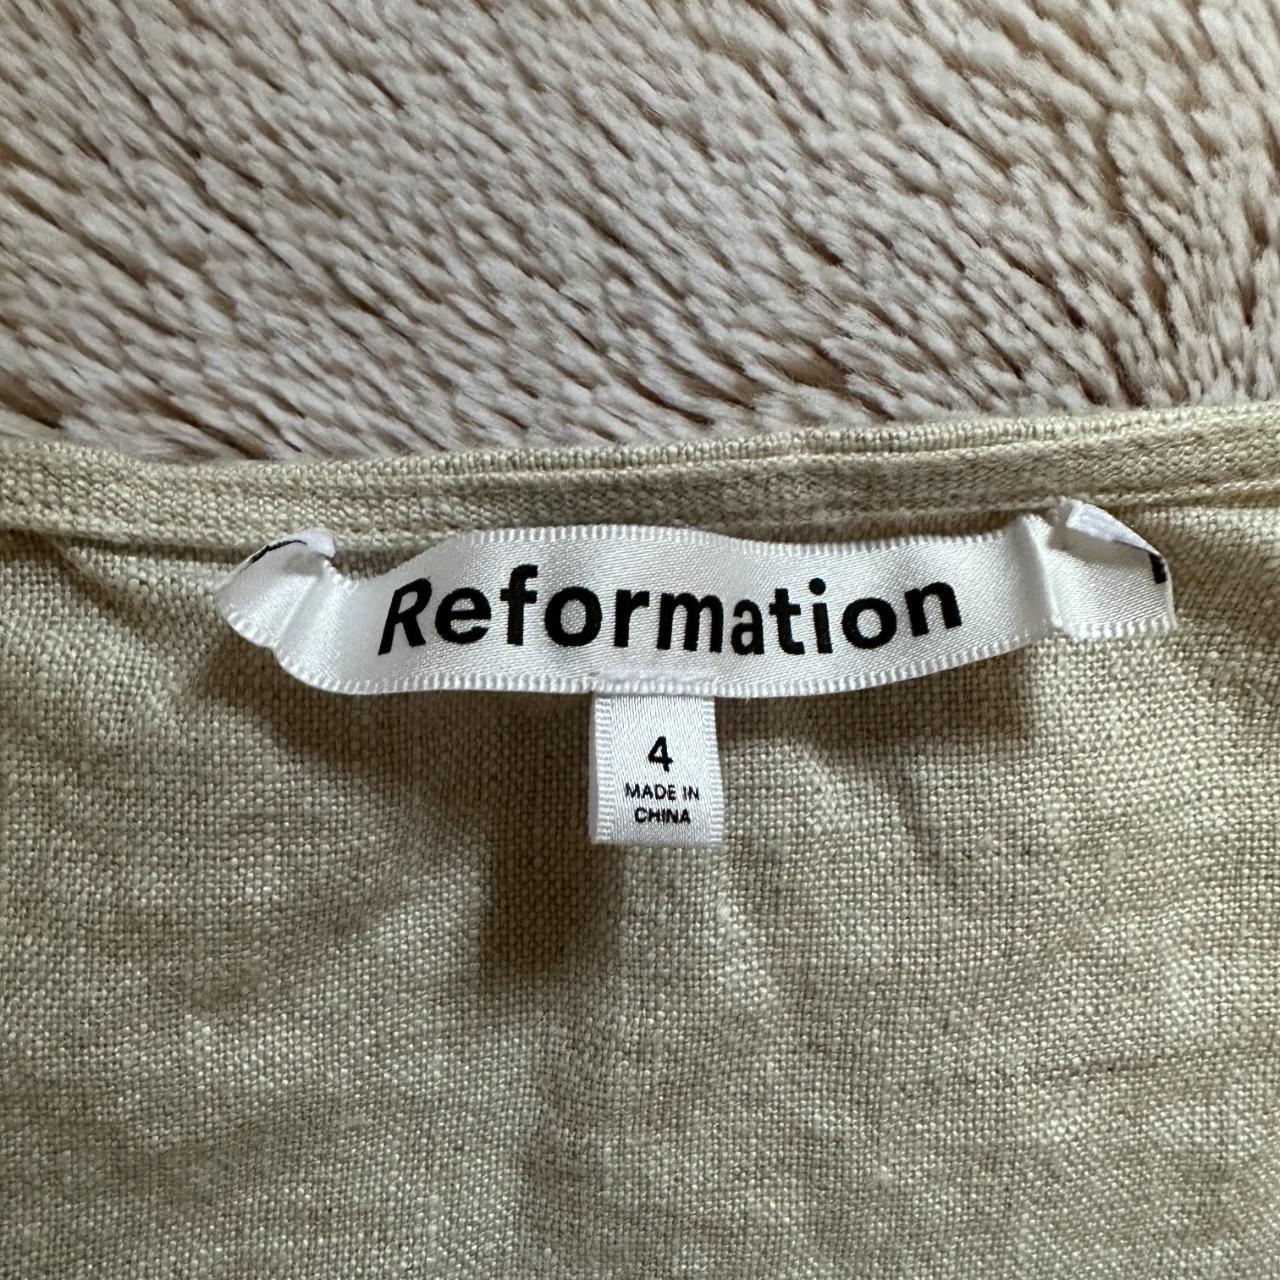 Reformation Jill Linen dress. Sold out/out of stock - Depop